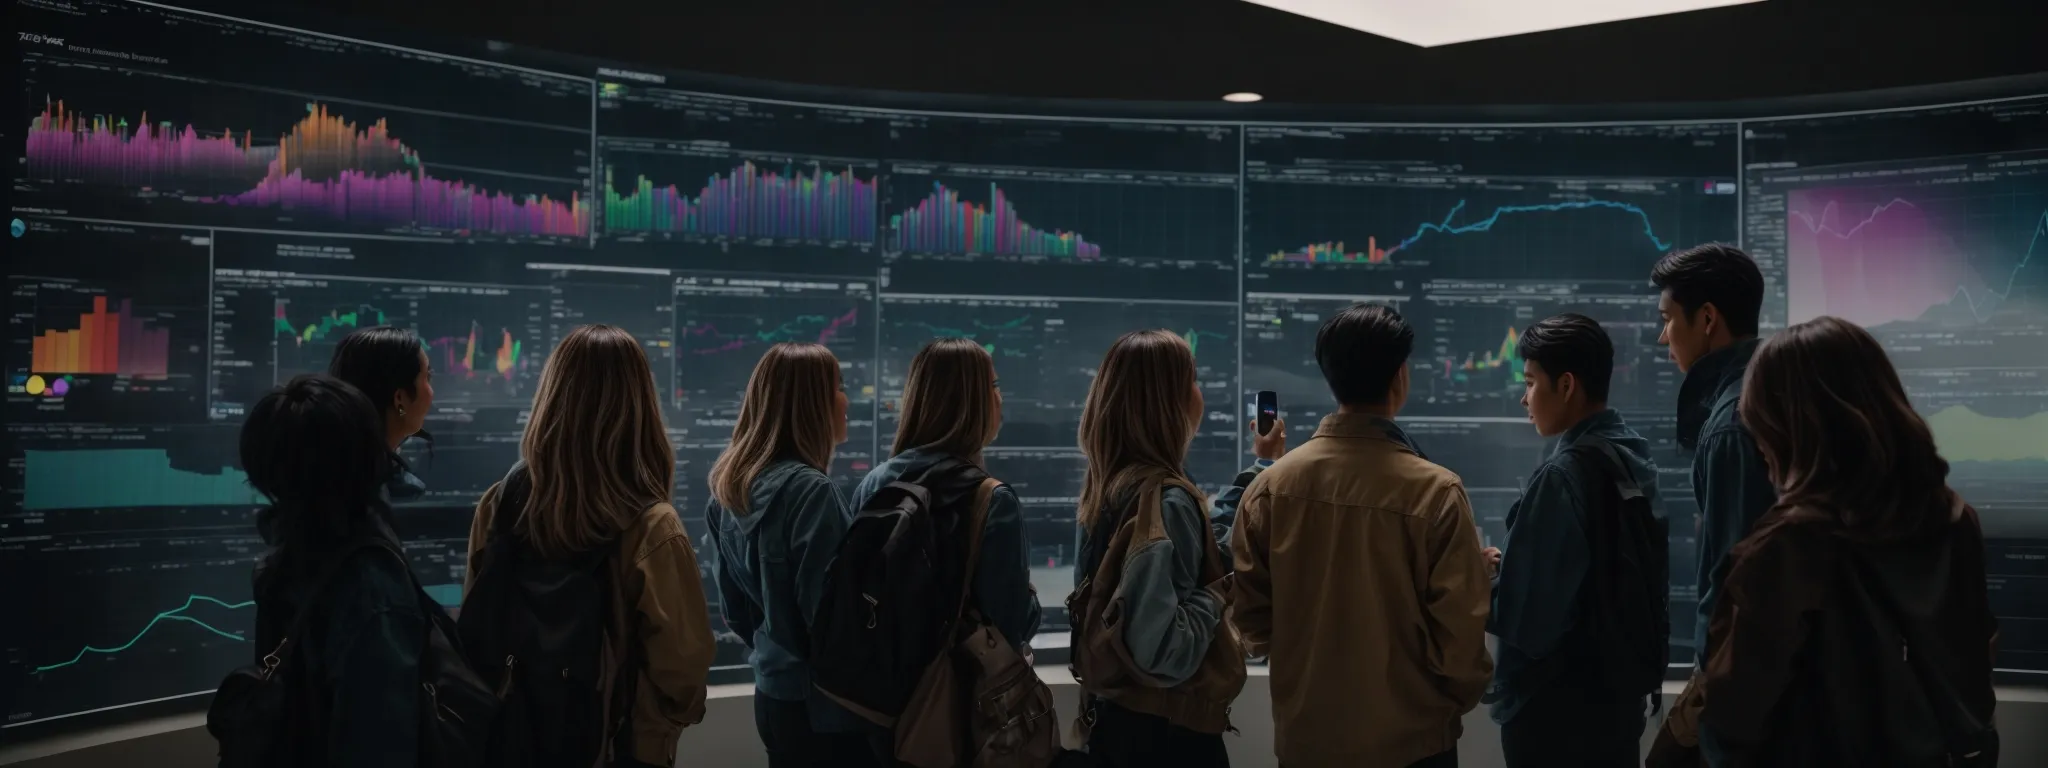 a group of diverse people gather around a large touchscreen displaying colorful graphs and social media icons, discussing strategies.